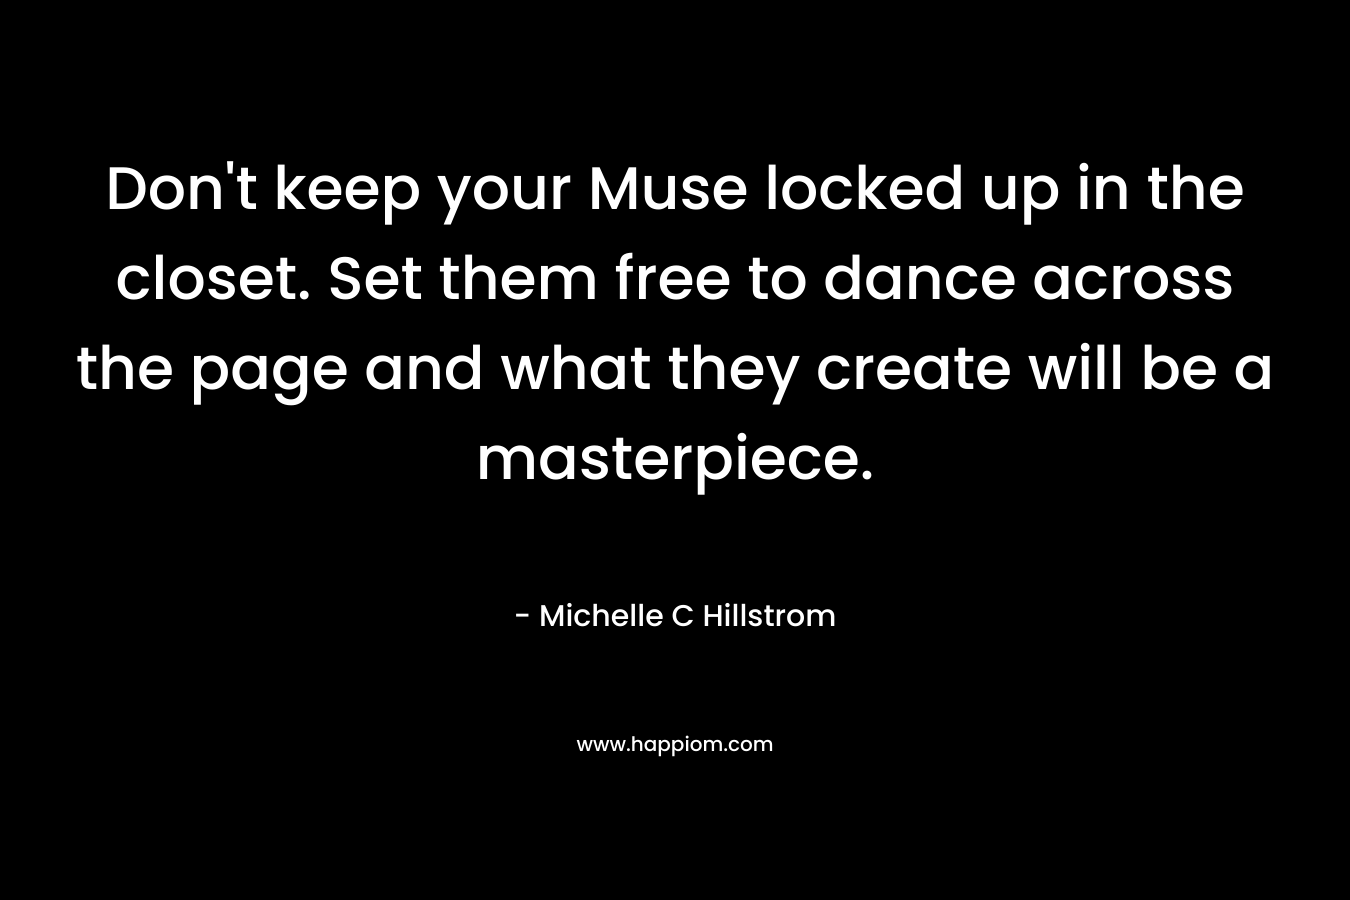 Don't keep your Muse locked up in the closet. Set them free to dance across the page and what they create will be a masterpiece.